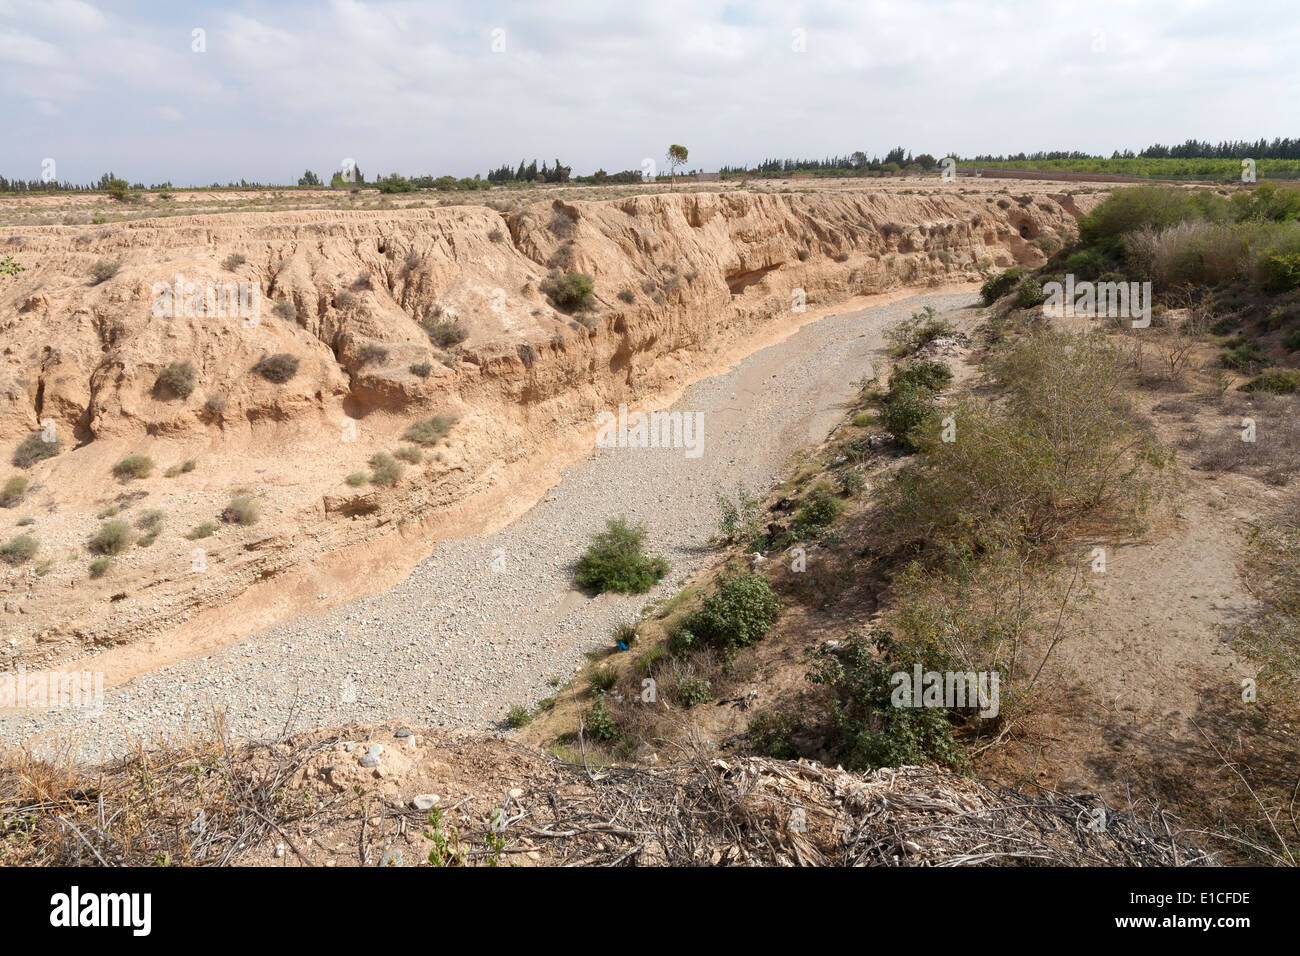 Looking down into a dry wadi with gravel bottom and mud cliffs Stock Photo